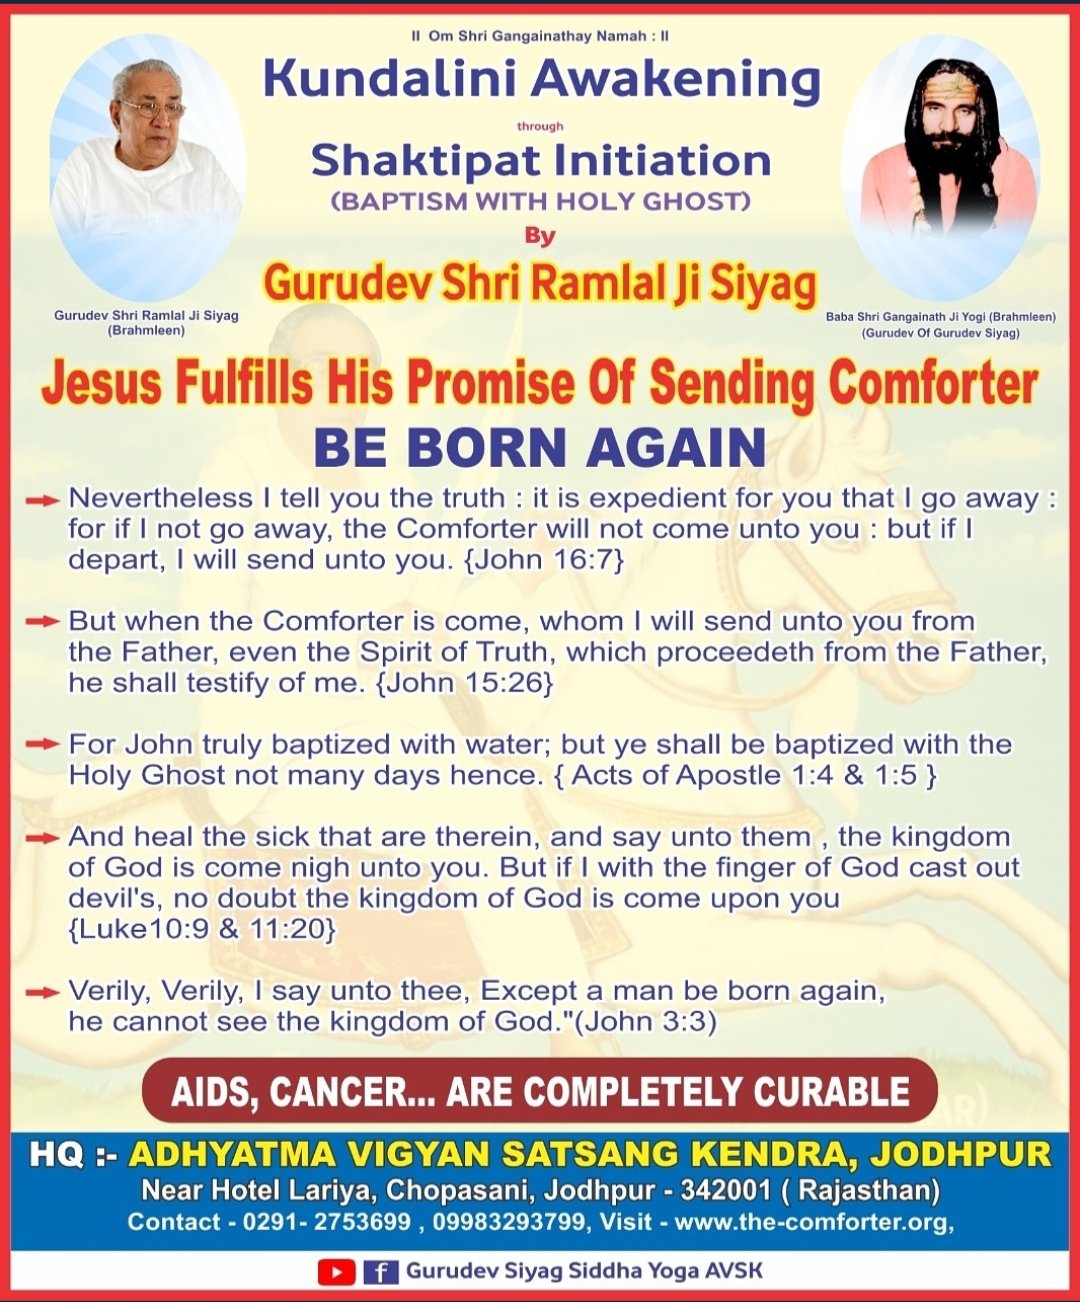 shrl Ganaalt Kundalini Awakening Shaktipat Initiation (BAPTISM With HOLY GhOST) Gurudev Shri Ramlal Ji Siyag , Luruu Ef| RttME AhGlnulnain tnonMeatntin IBrehmlccni {dun00 Cuuat #n'al Jesus Fulfills His Promise Of Sending Comforter BE BORN AGAIN Nevertheless tell you the truth it is expedient for you that go away for if not go away; the Comforter will not come unto you but if depart, will send unto you {John 16.7} But when the Comforter is come whom will send unto you from the Father; even the Spirit of Truth, which proceedeth from the Father; he shall testify of me_ {John 15.26} For John truly baptized with water; but ye shall be baptized with the Holy Ghost not many days hence. {Acts of Apostle 1.4 & 1:5 And heal the sick that are therein and say unto them the kingdom of God is come nigh unto you: But if with the finger of God cast out devil's no doubt the kingdom of God is come you {Luke10.9 11.20} Verily; Verily; say unto thee Except a man be born again he cannot see the kingdom of God "(John 3.3) AIdS; CANCER_ ARE COMPLETELY CURABLE HQ : ADHYATMA VIGYAN SATSANG KENDRA, JODHPUR Near Hotel Lariya; Chopasani, Jodhpur 342001 Rajasthan) Contact 0291 - 2753699 09983293799  Visit wwWthe-comforterorg; Gurudev Siyag Siddha AVSK upon Yoga_